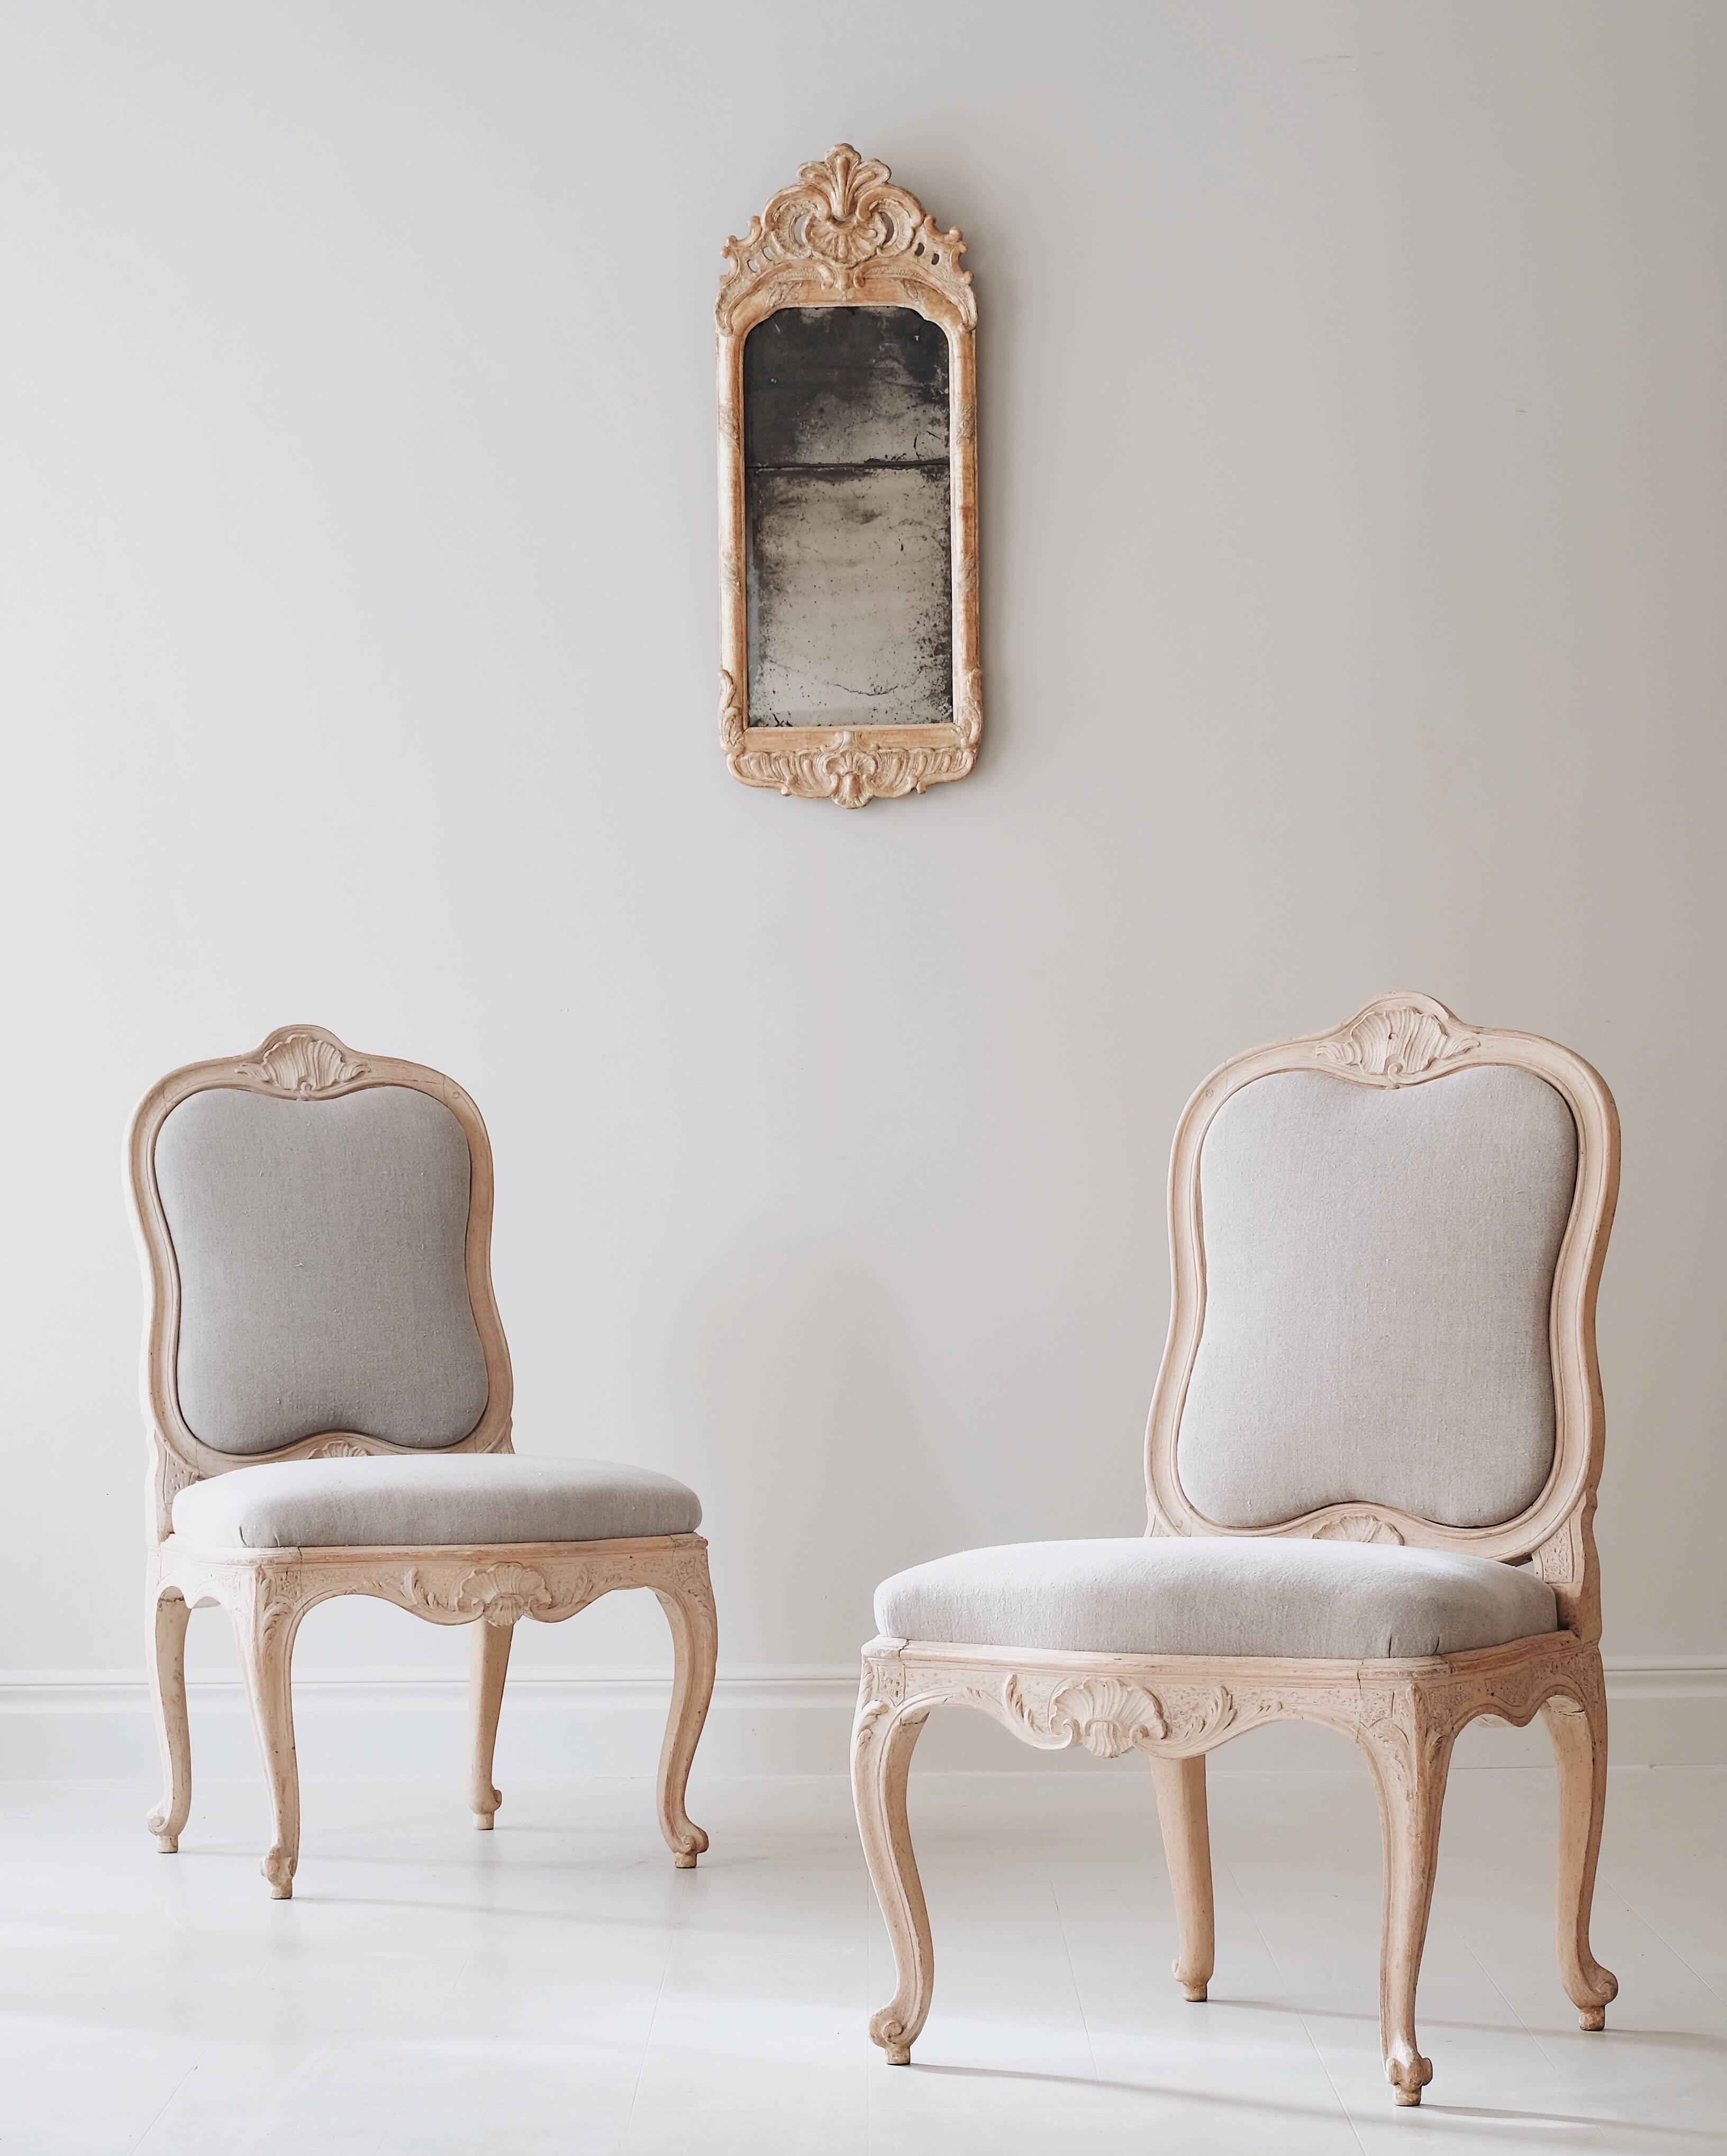 Exceptional pair of Swedish Rococo period chairs in their original finish and the initial padding upholstered in a new raw linen, circa 1760 Stockholm, Sweden.

Literature: Lars Sjöberg. Stolar, taburetter & fåtöljer i Sverige från 1600 till 1800.